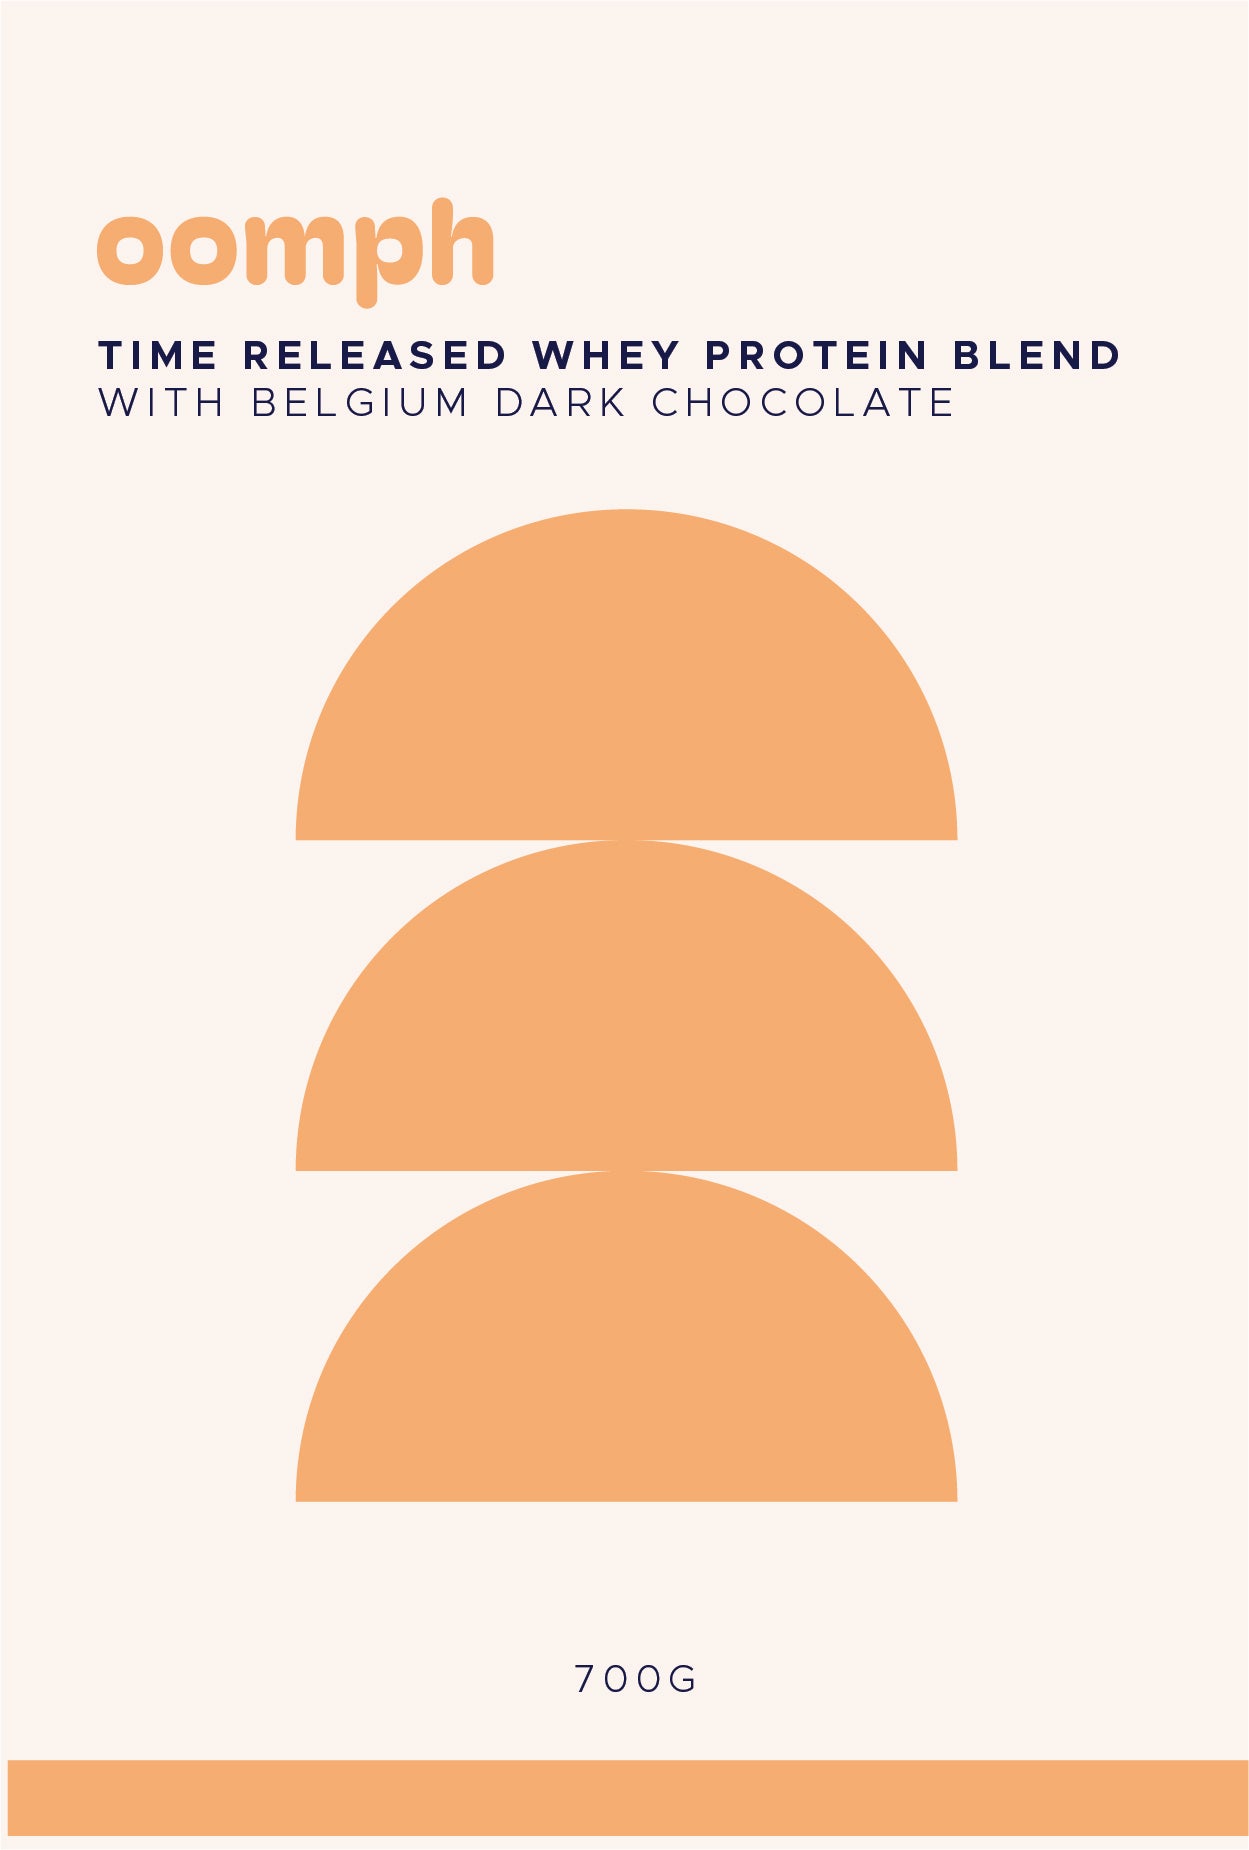 OOMPH Time Released Whey Protein Blend with Belgium Dark Chocolate 700g